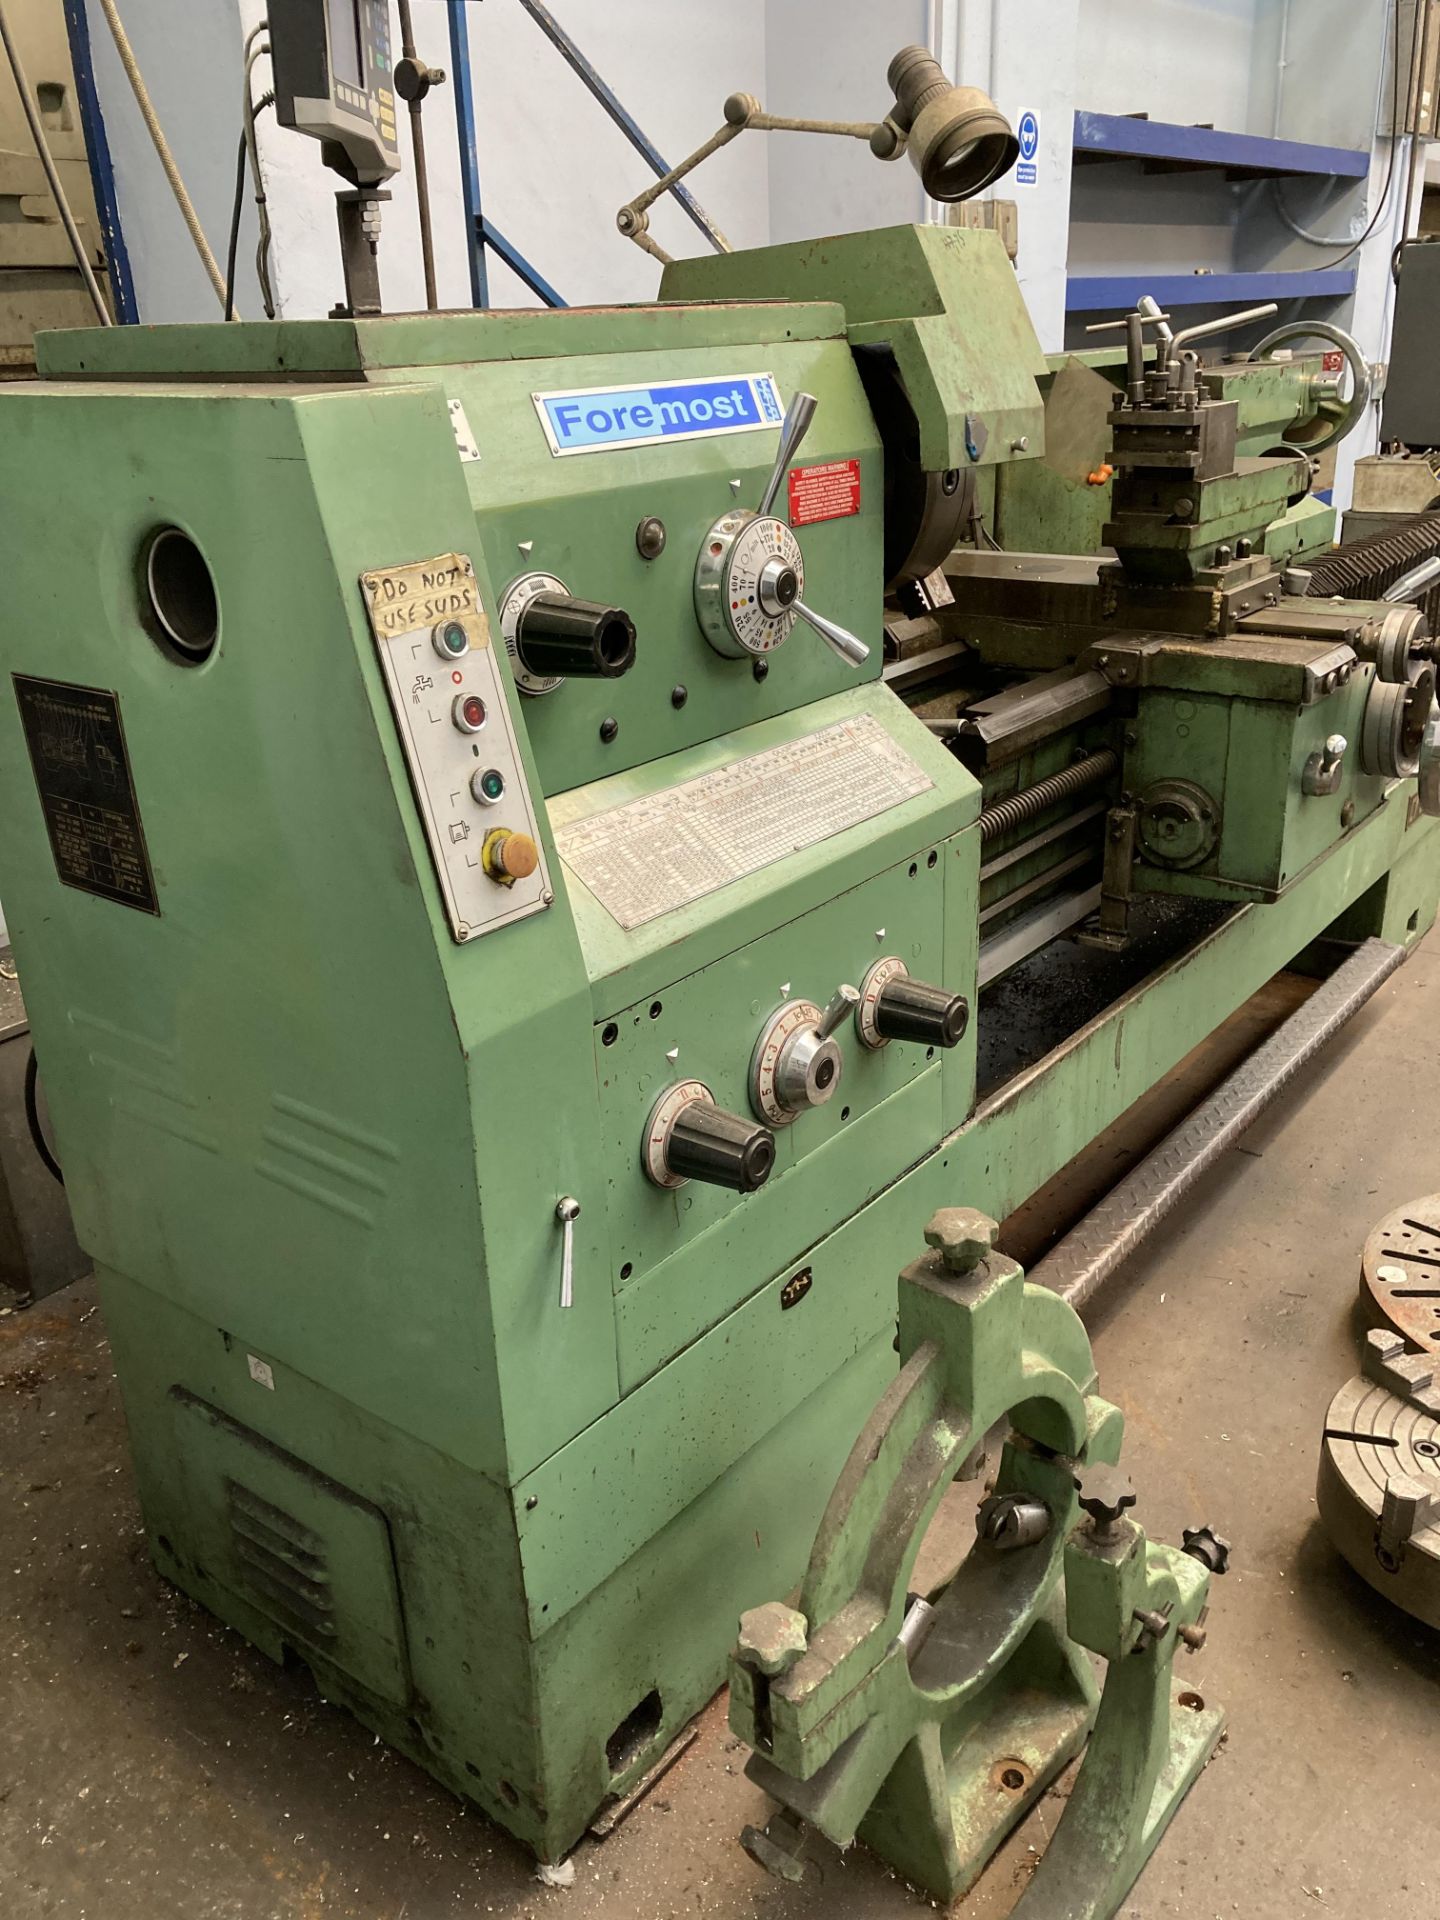 BSA Foremost Model CY6263BX x 1500 gap bed centre lathe, Serial no. 79102733, 450mm (gap in swing) x - Image 2 of 9